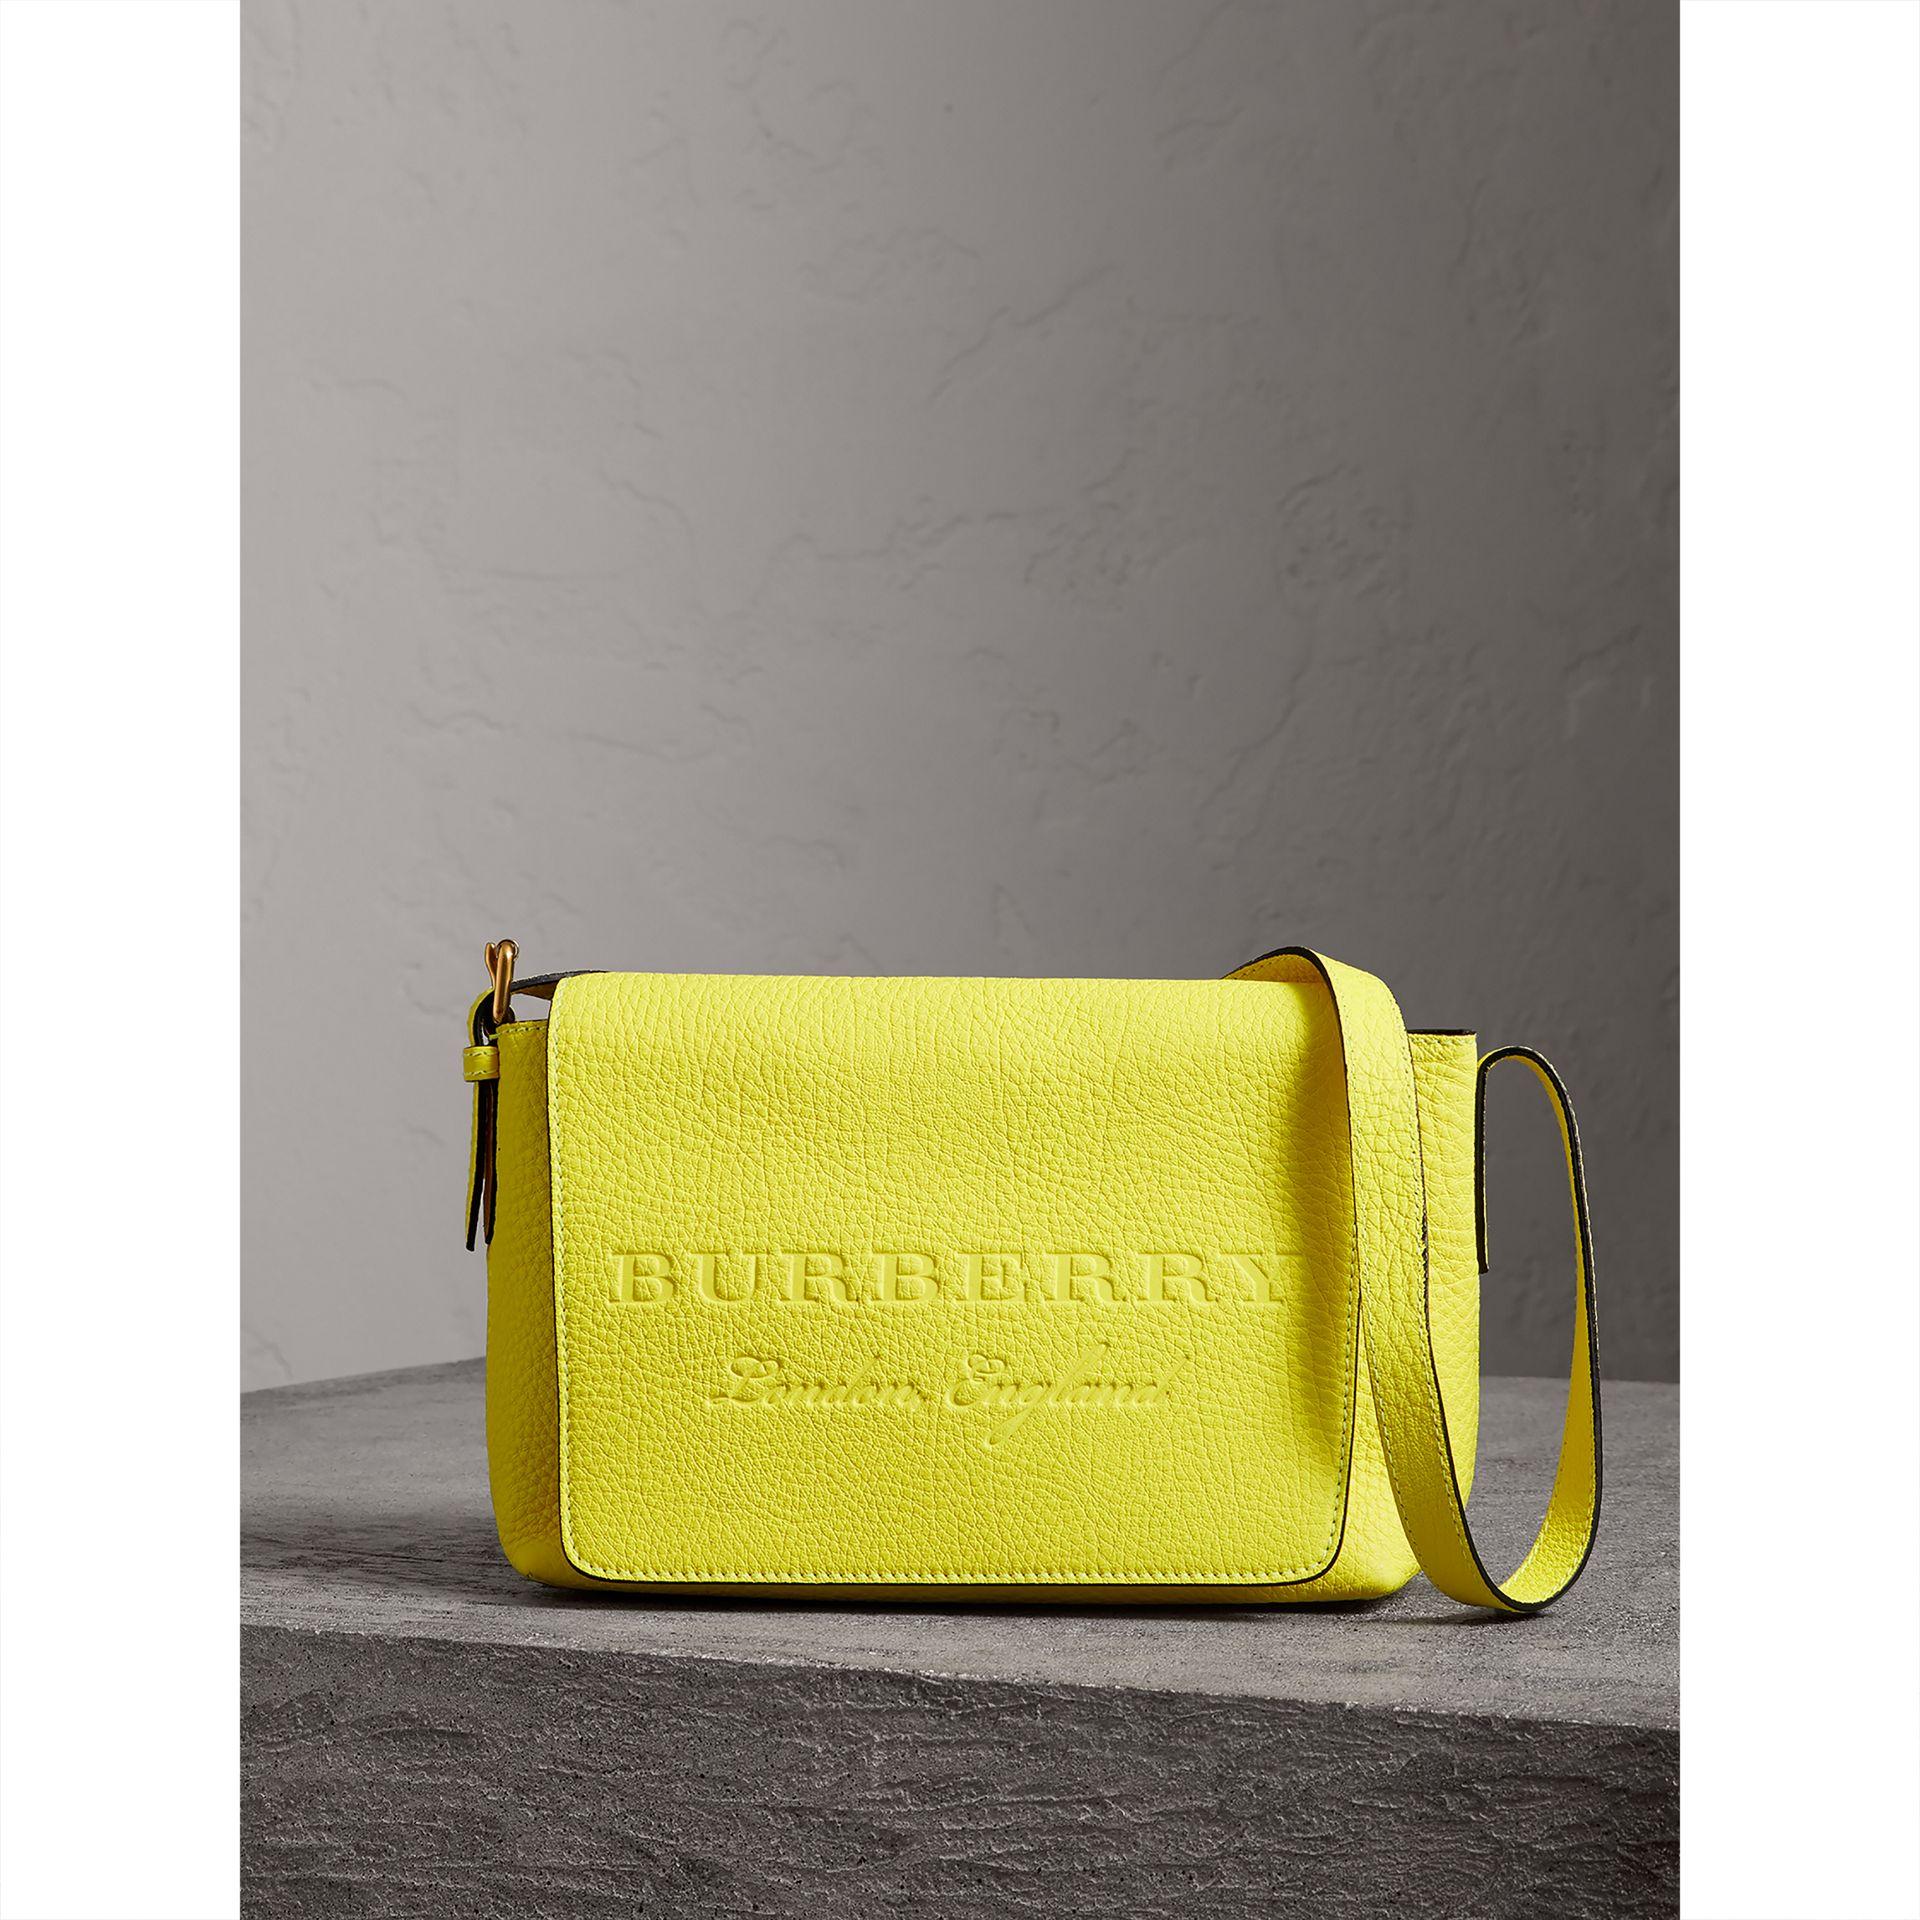 Burberry Small Embossed Neon Leather 